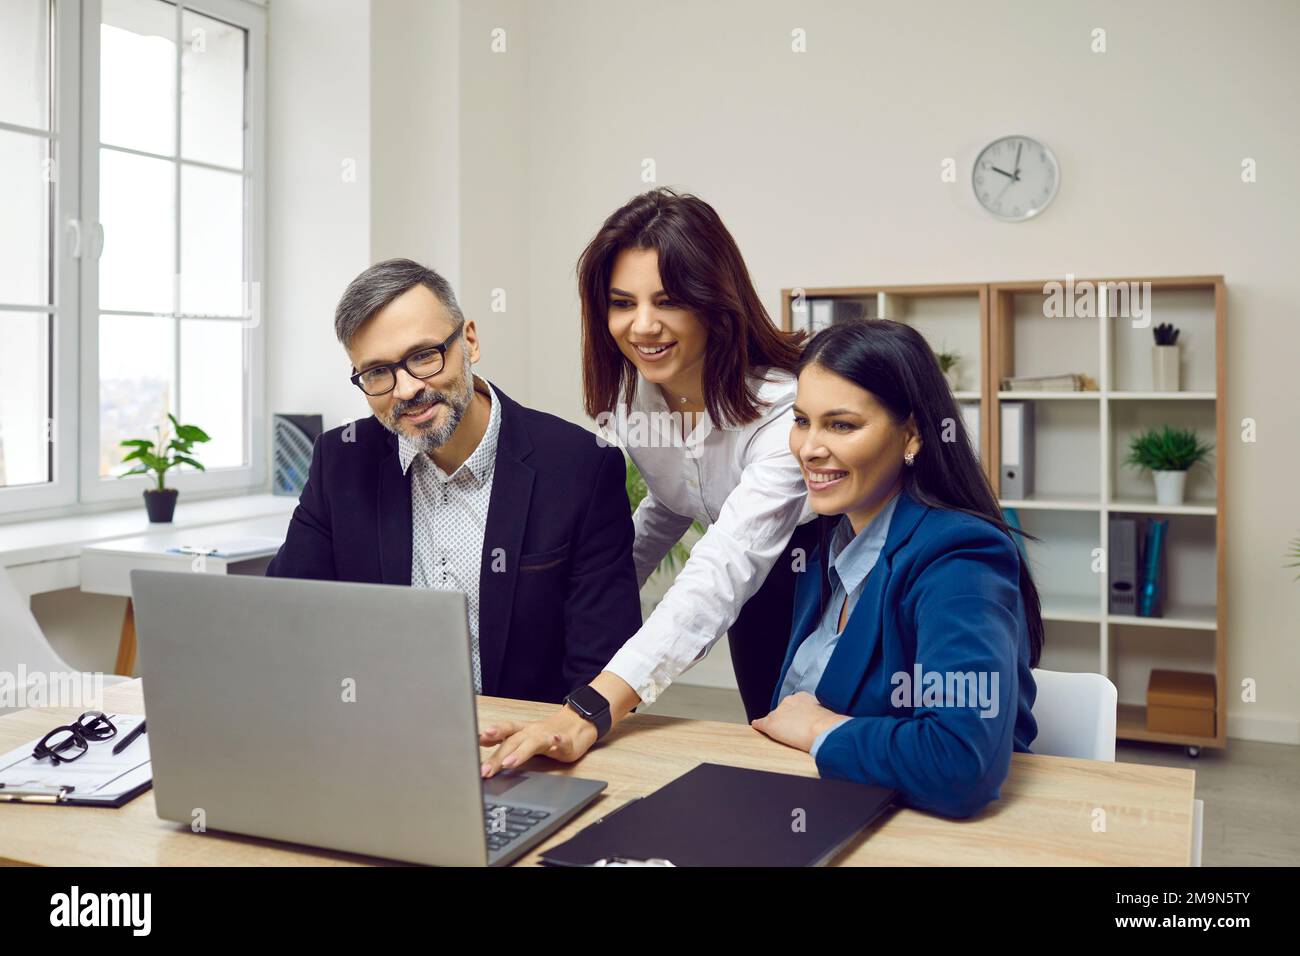 Group of confident business people analyzing data using laptop Stock Photo